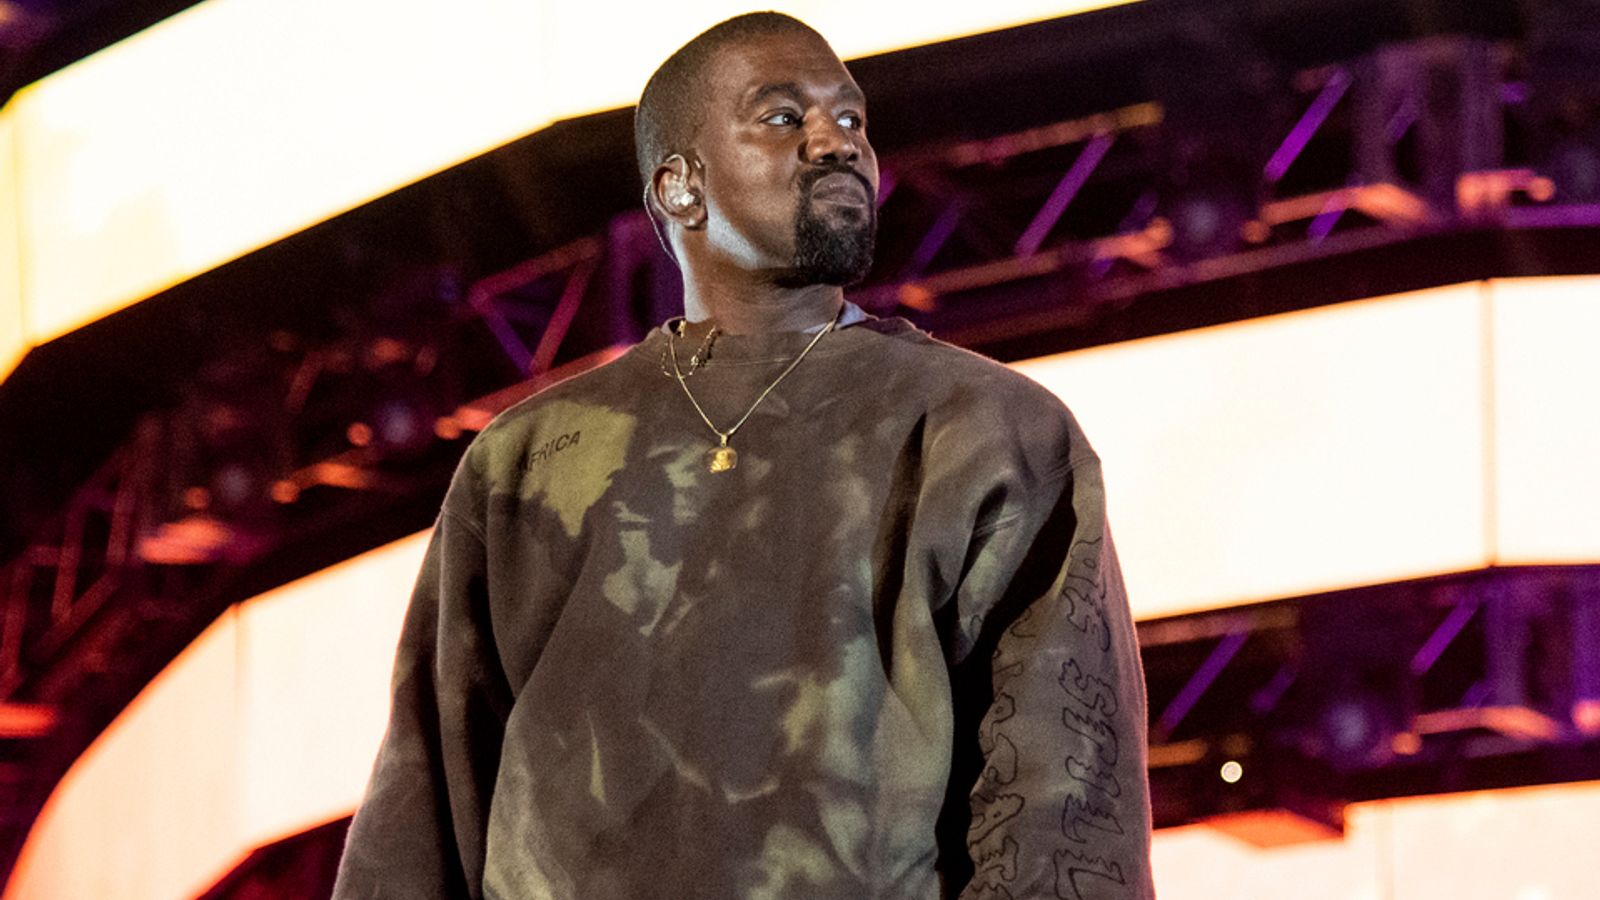 Adidas ends partnership with Kanye West over rapper's 'unacceptable, hateful and dangerous' comments